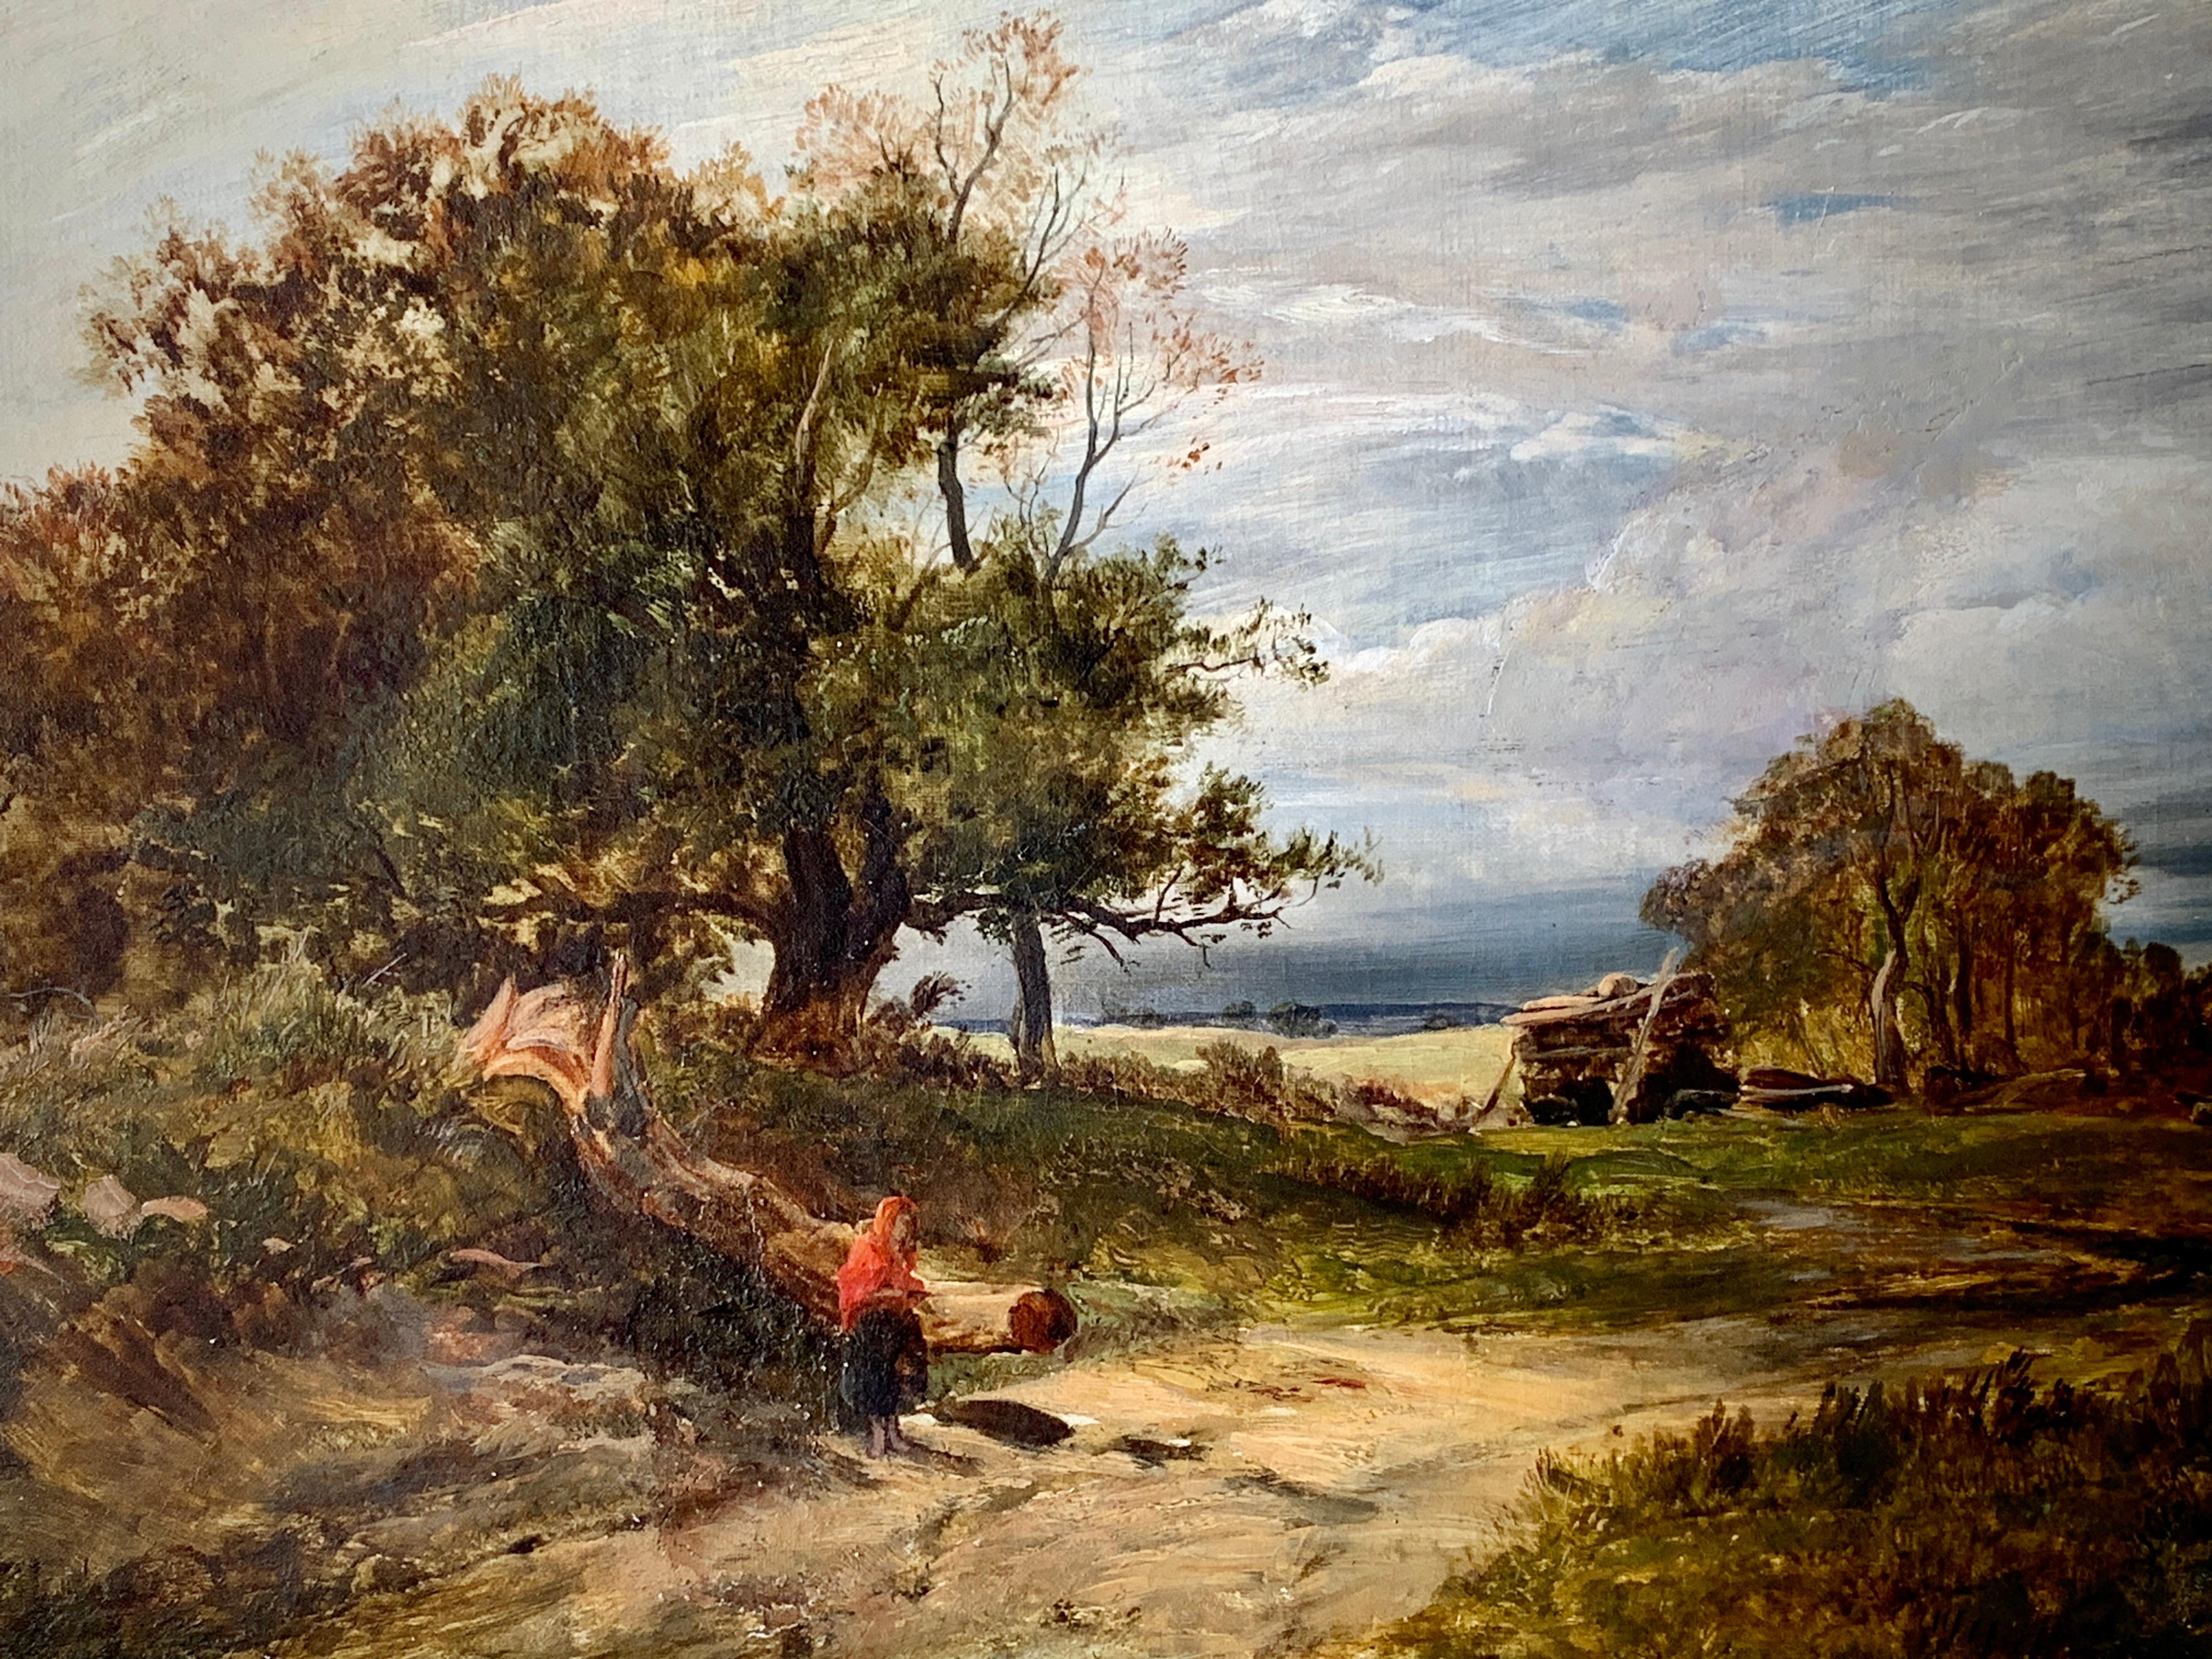 19th century English landscape with a figure on a pathway and stormy sky - Painting by Sidney Richard Percy